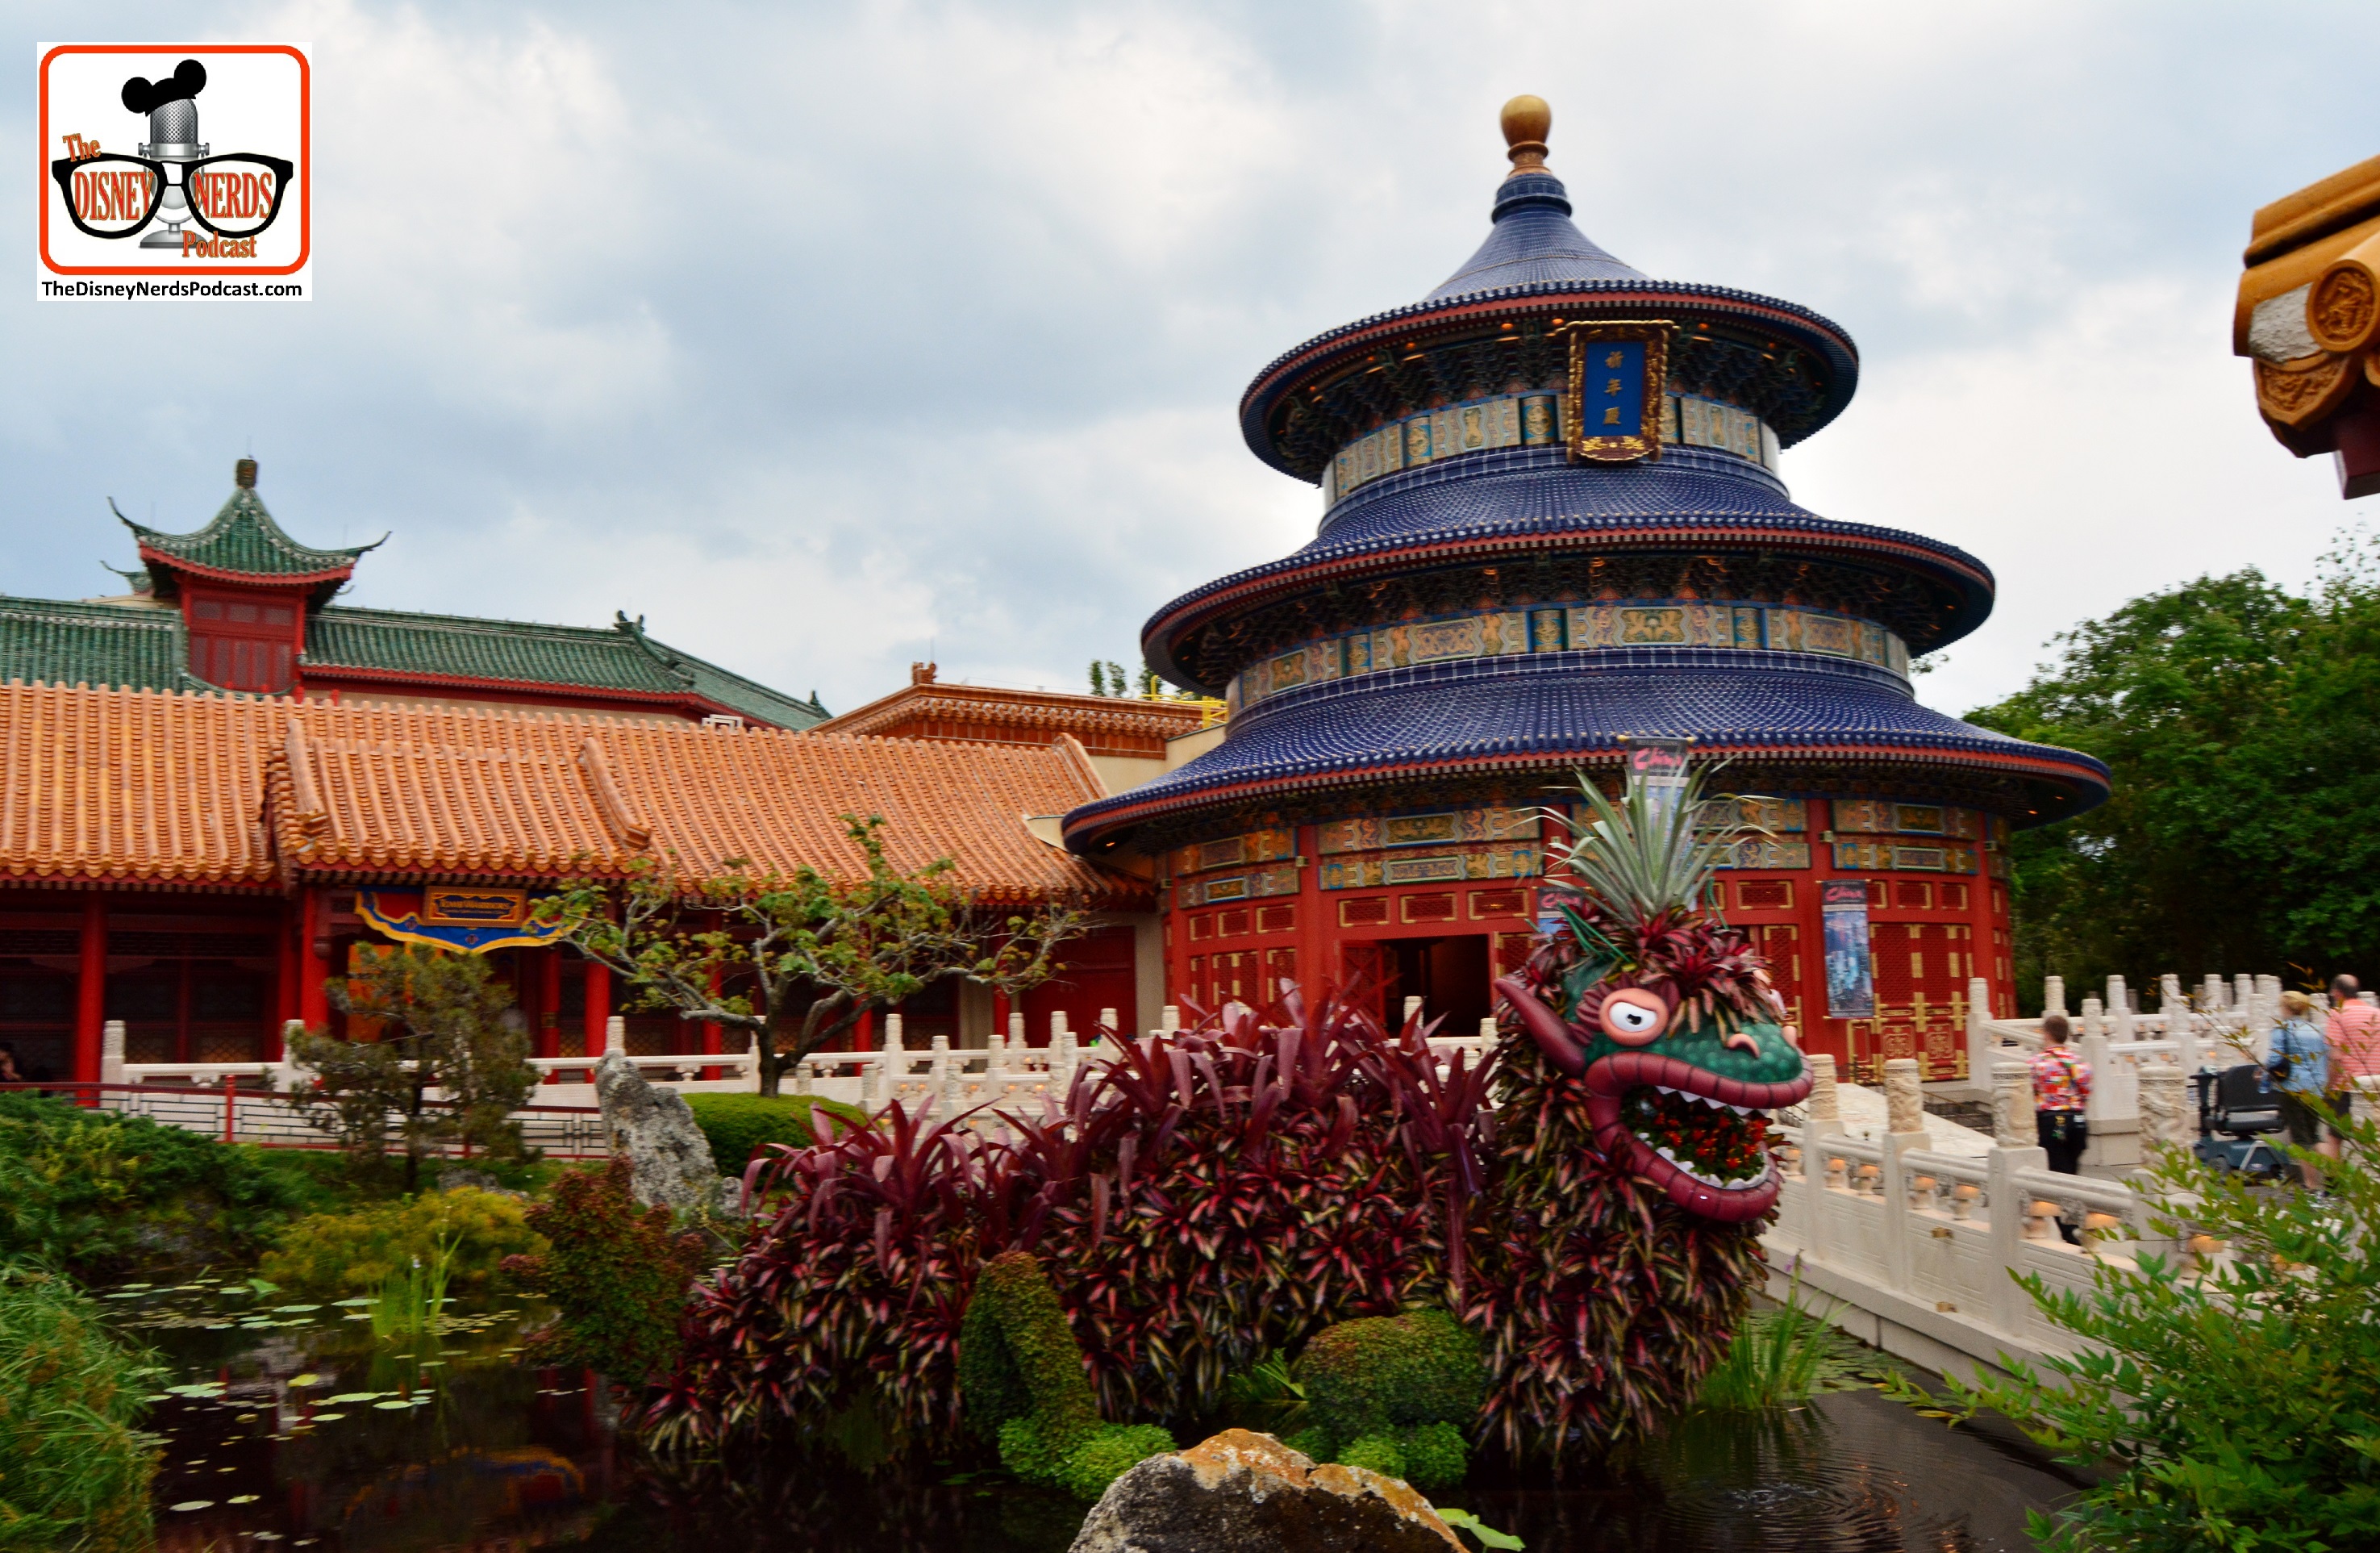 DNP April 2016 Photo Report: Epcot Flower and Garden Festival - Festival Dragon in china